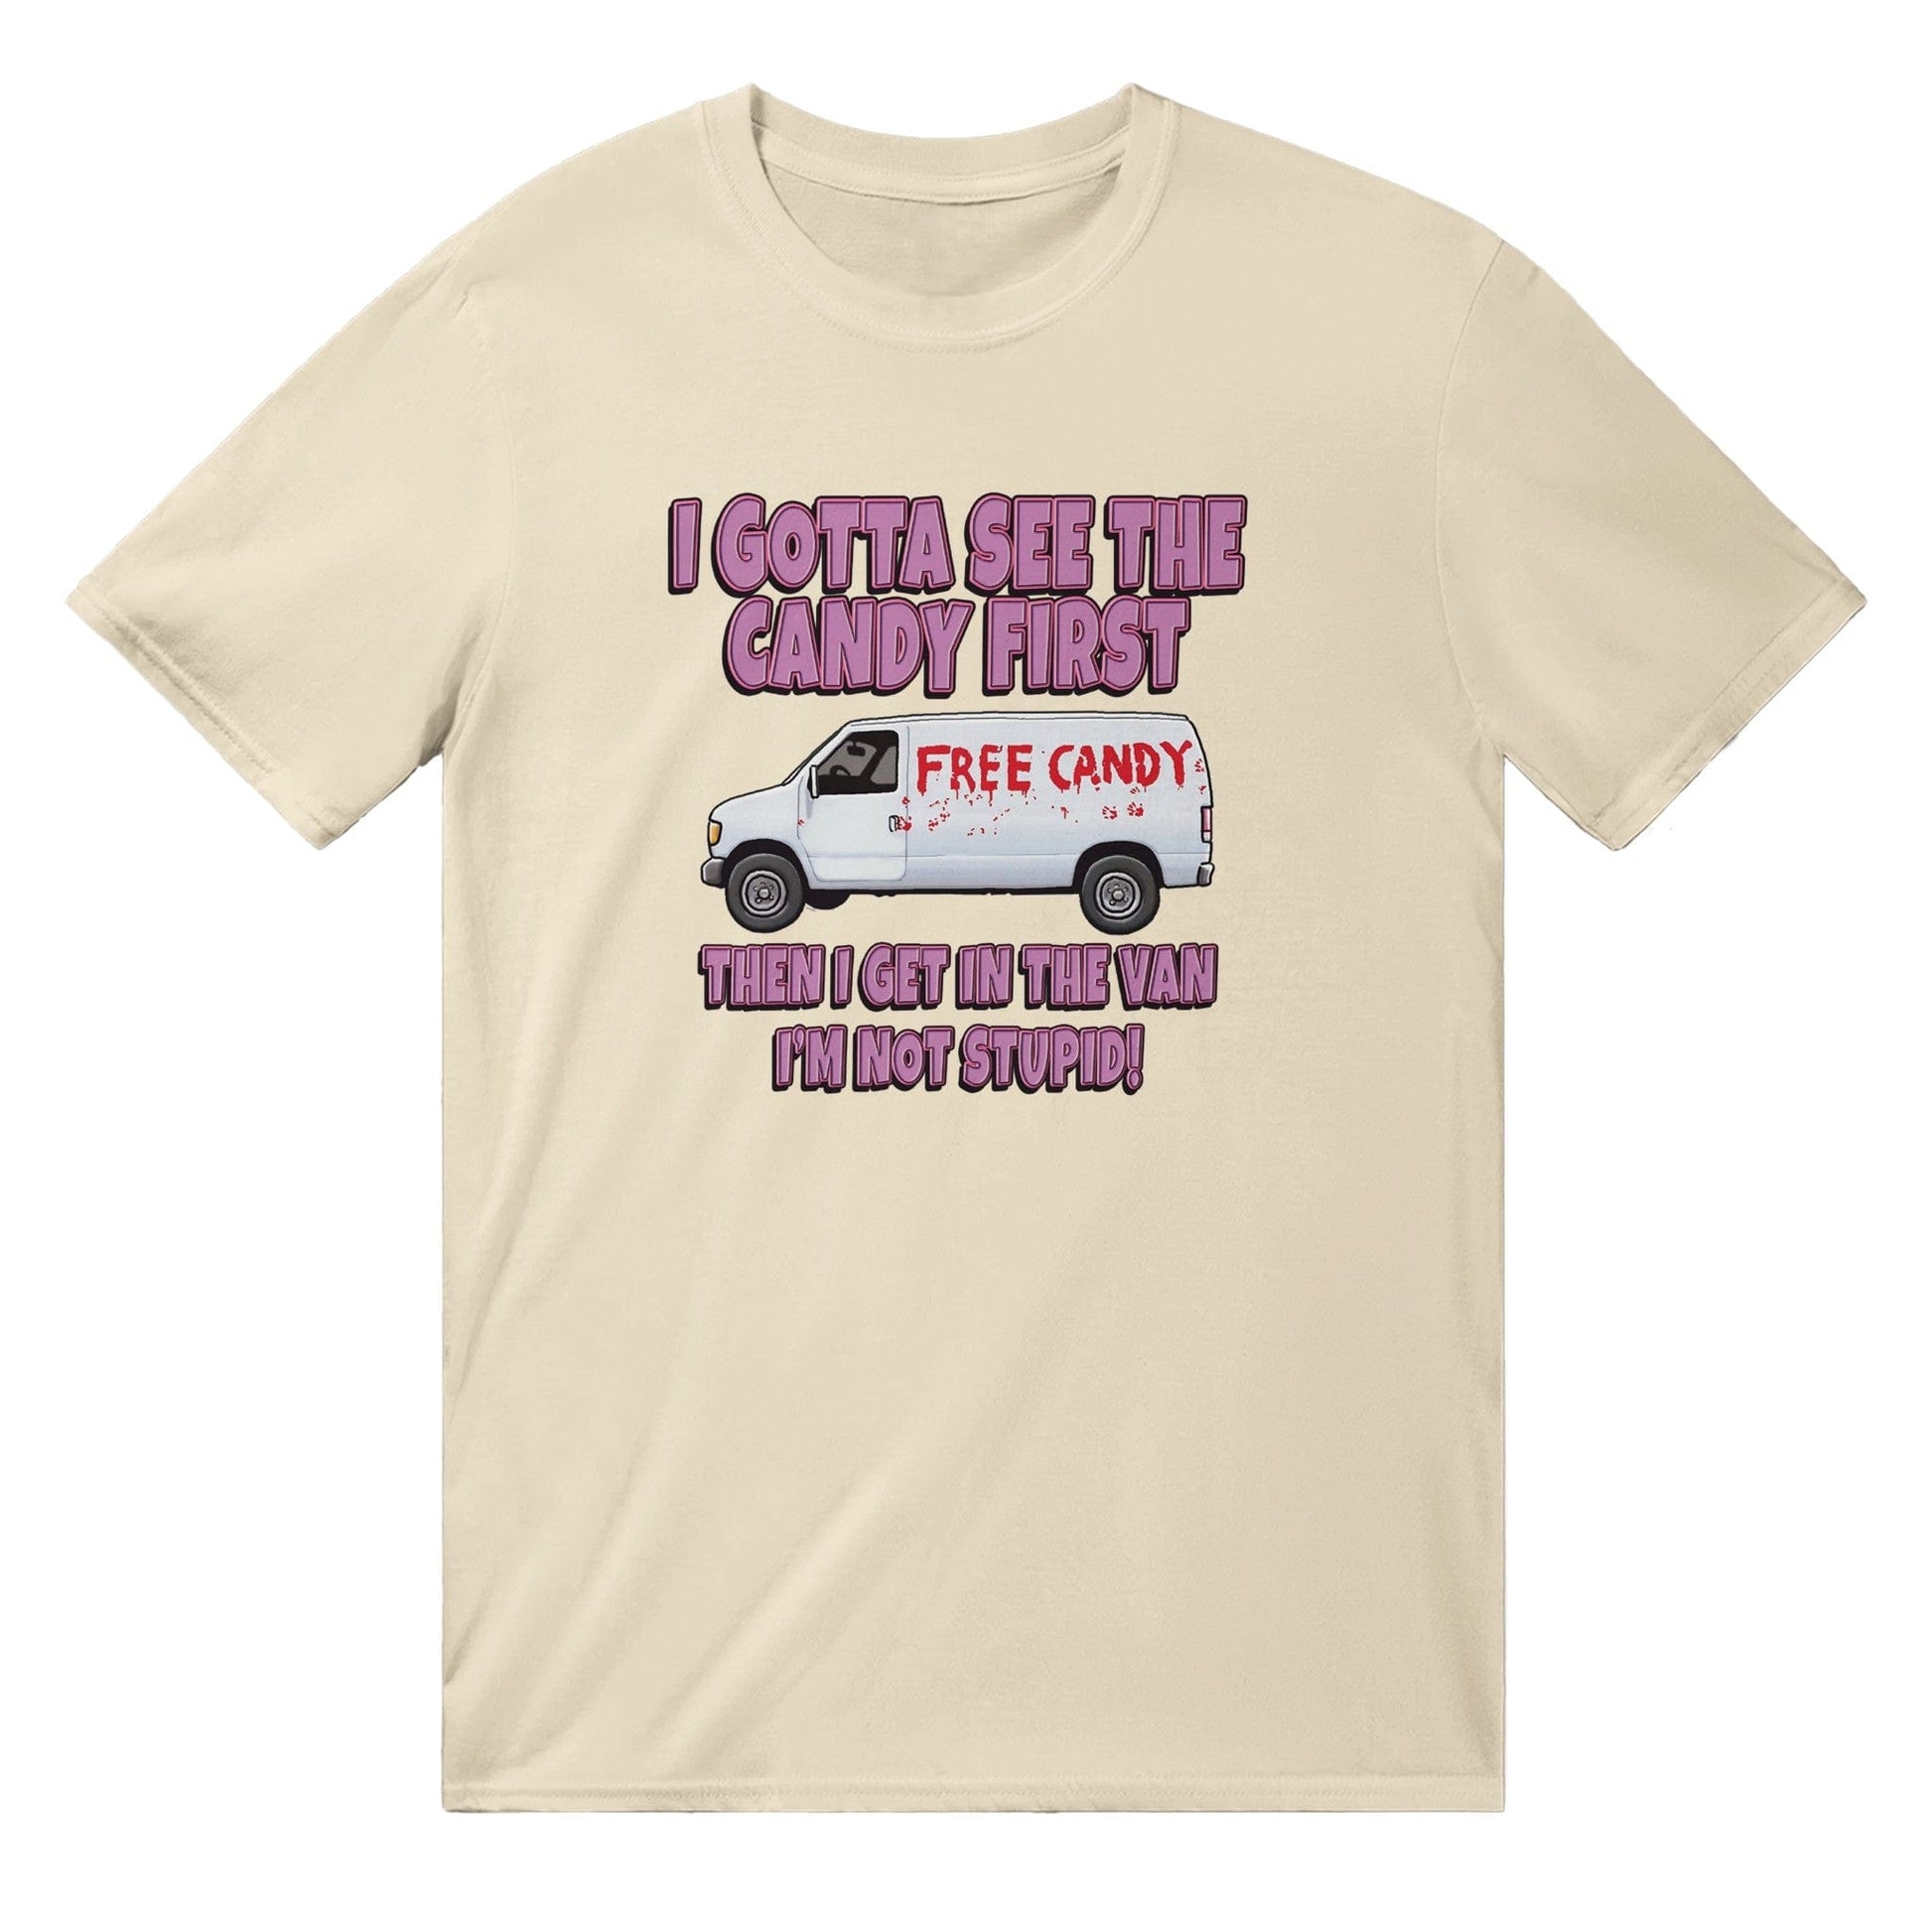 Candy First T-shirt Australia Online Color Natural / S